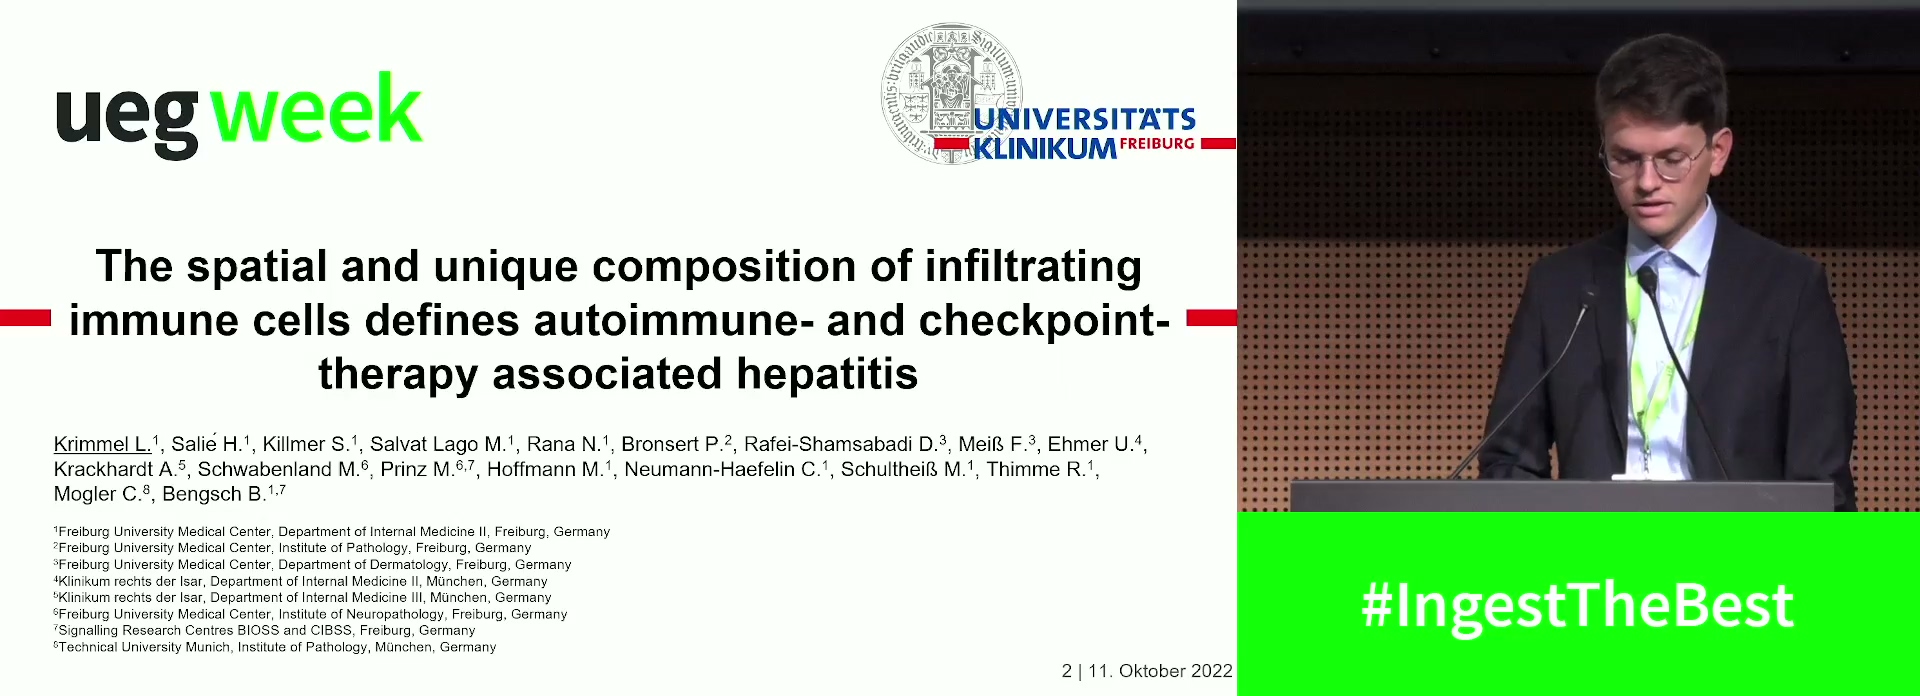 THE SPATIAL AND UNIQUE COMPOSITION OF INFILTRATING IMMUNE CELLS DEFINES AUTOIMMUNE- AND CHECKPOINT-THERAPY ASSOCIATED HEPATITIS